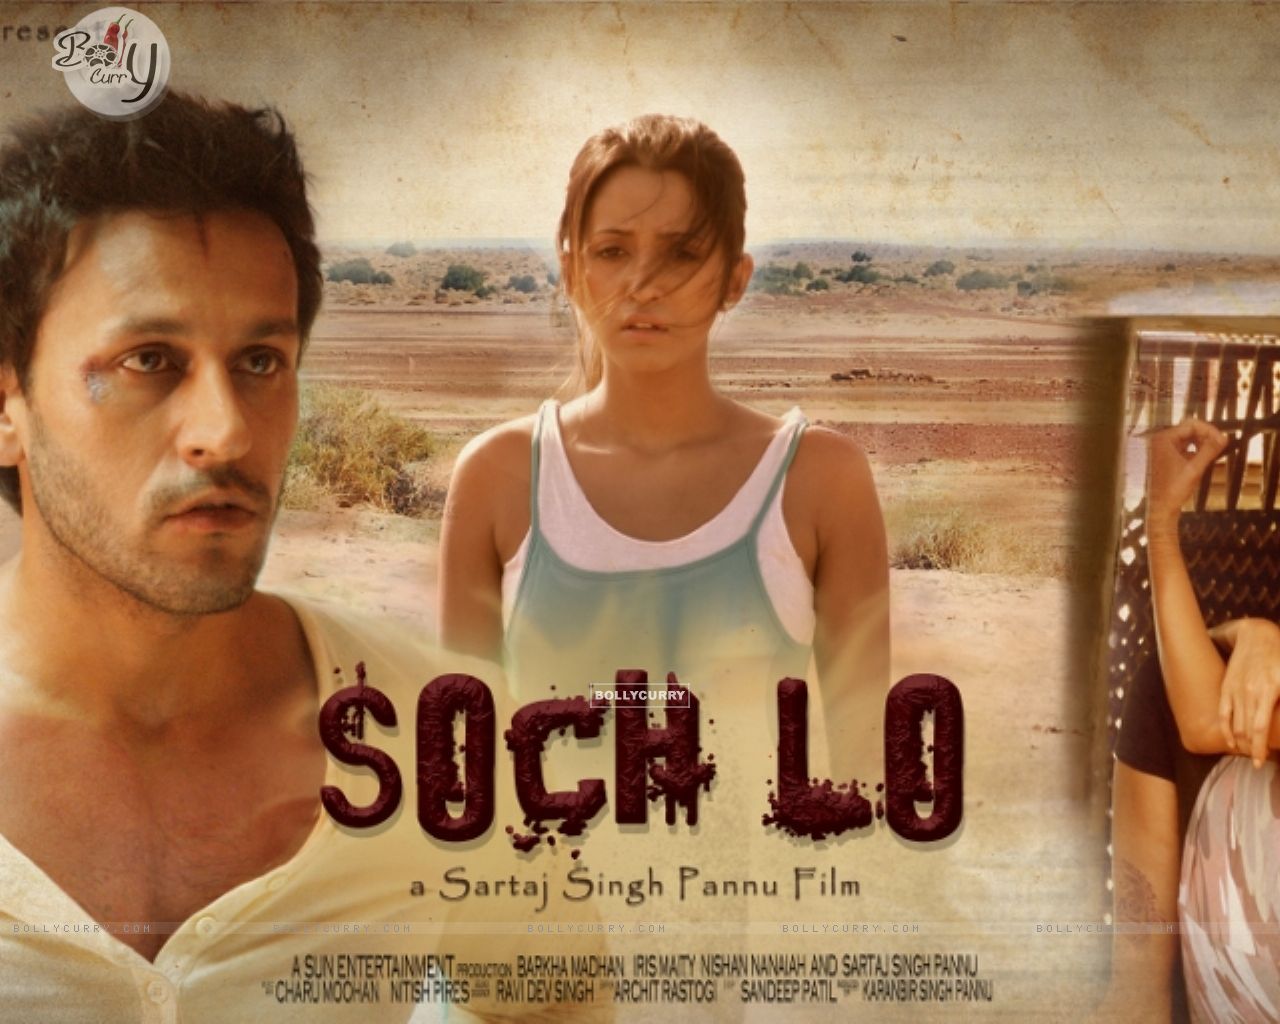 http://img.bollycurry.com/wallpapers/1280x1024/58700-poster-of-the-movie-soch-lo.jpg